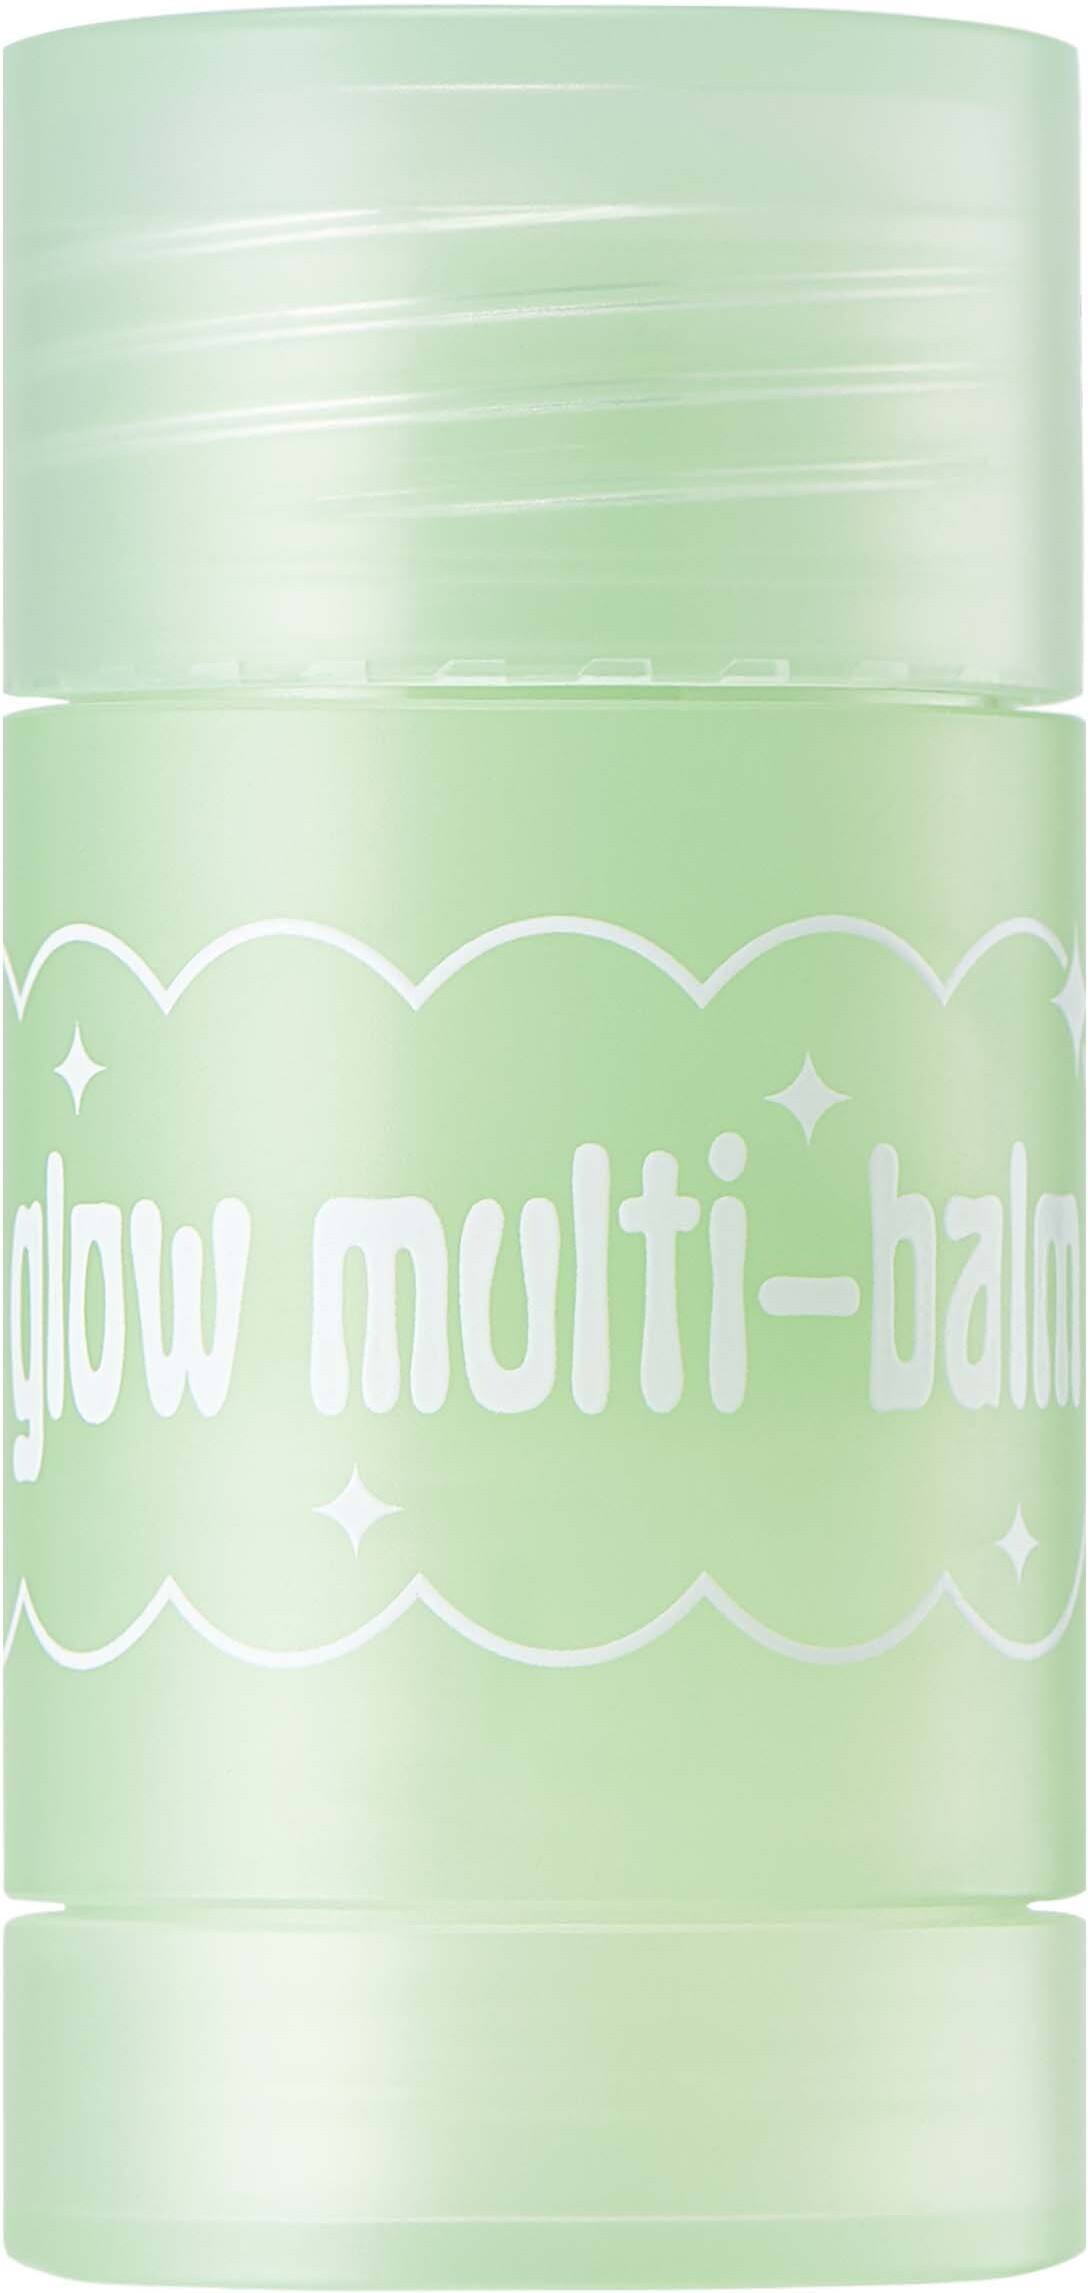 Chasin’ Rabbits All About Glow Multi-Balm 7 g